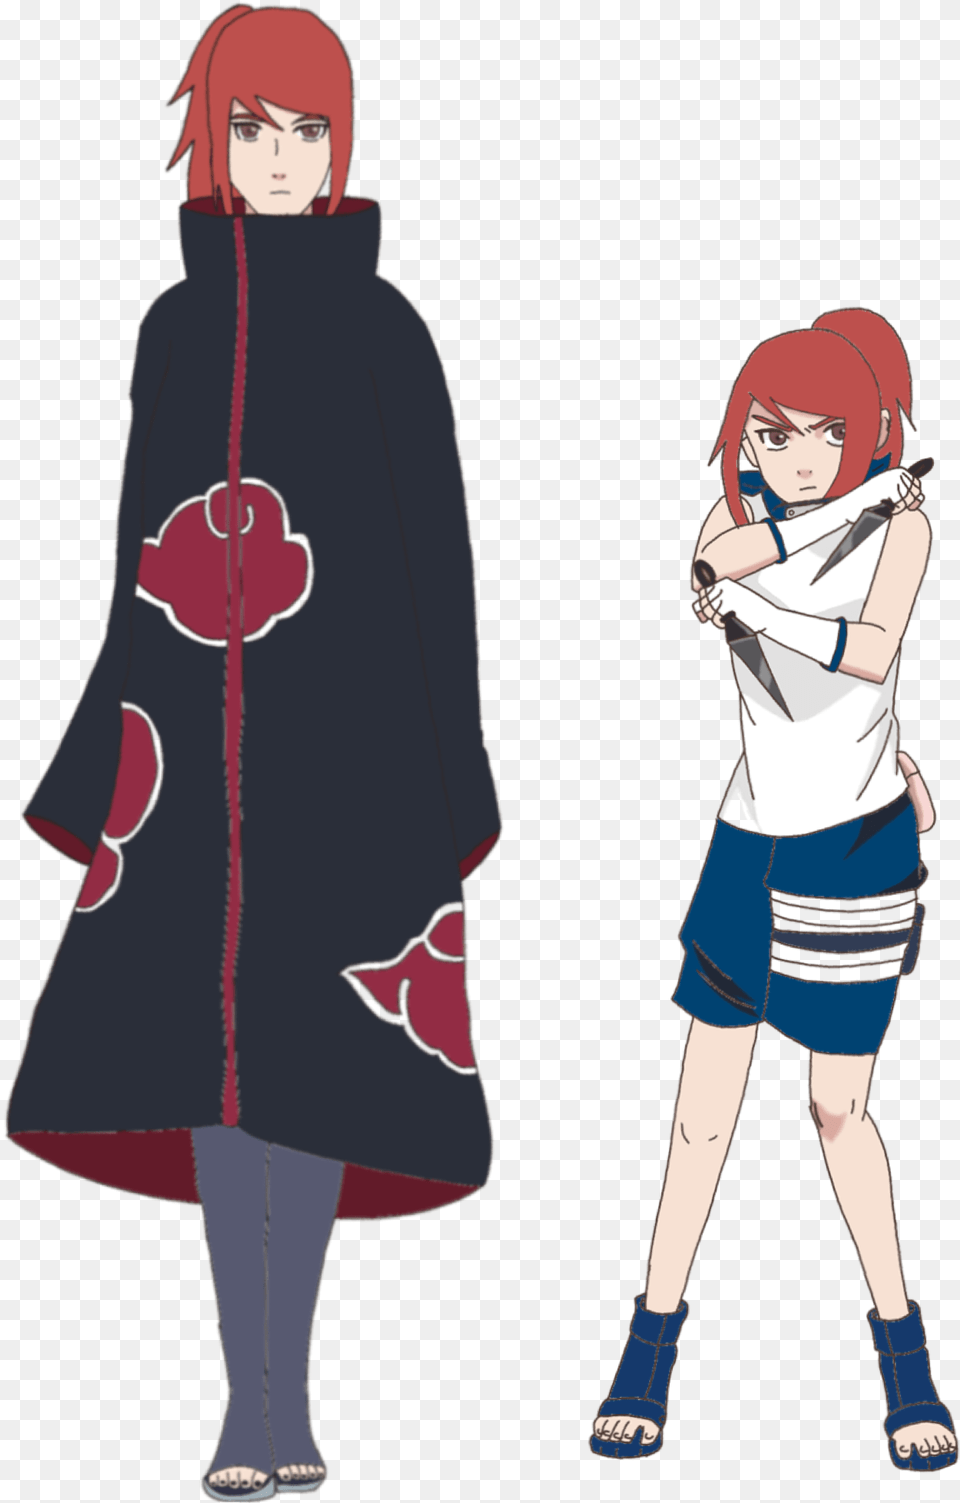 Naruto Oc Red Hair Red Hair Naruto Oc Female, Adult, Person, Fashion, Woman Png Image